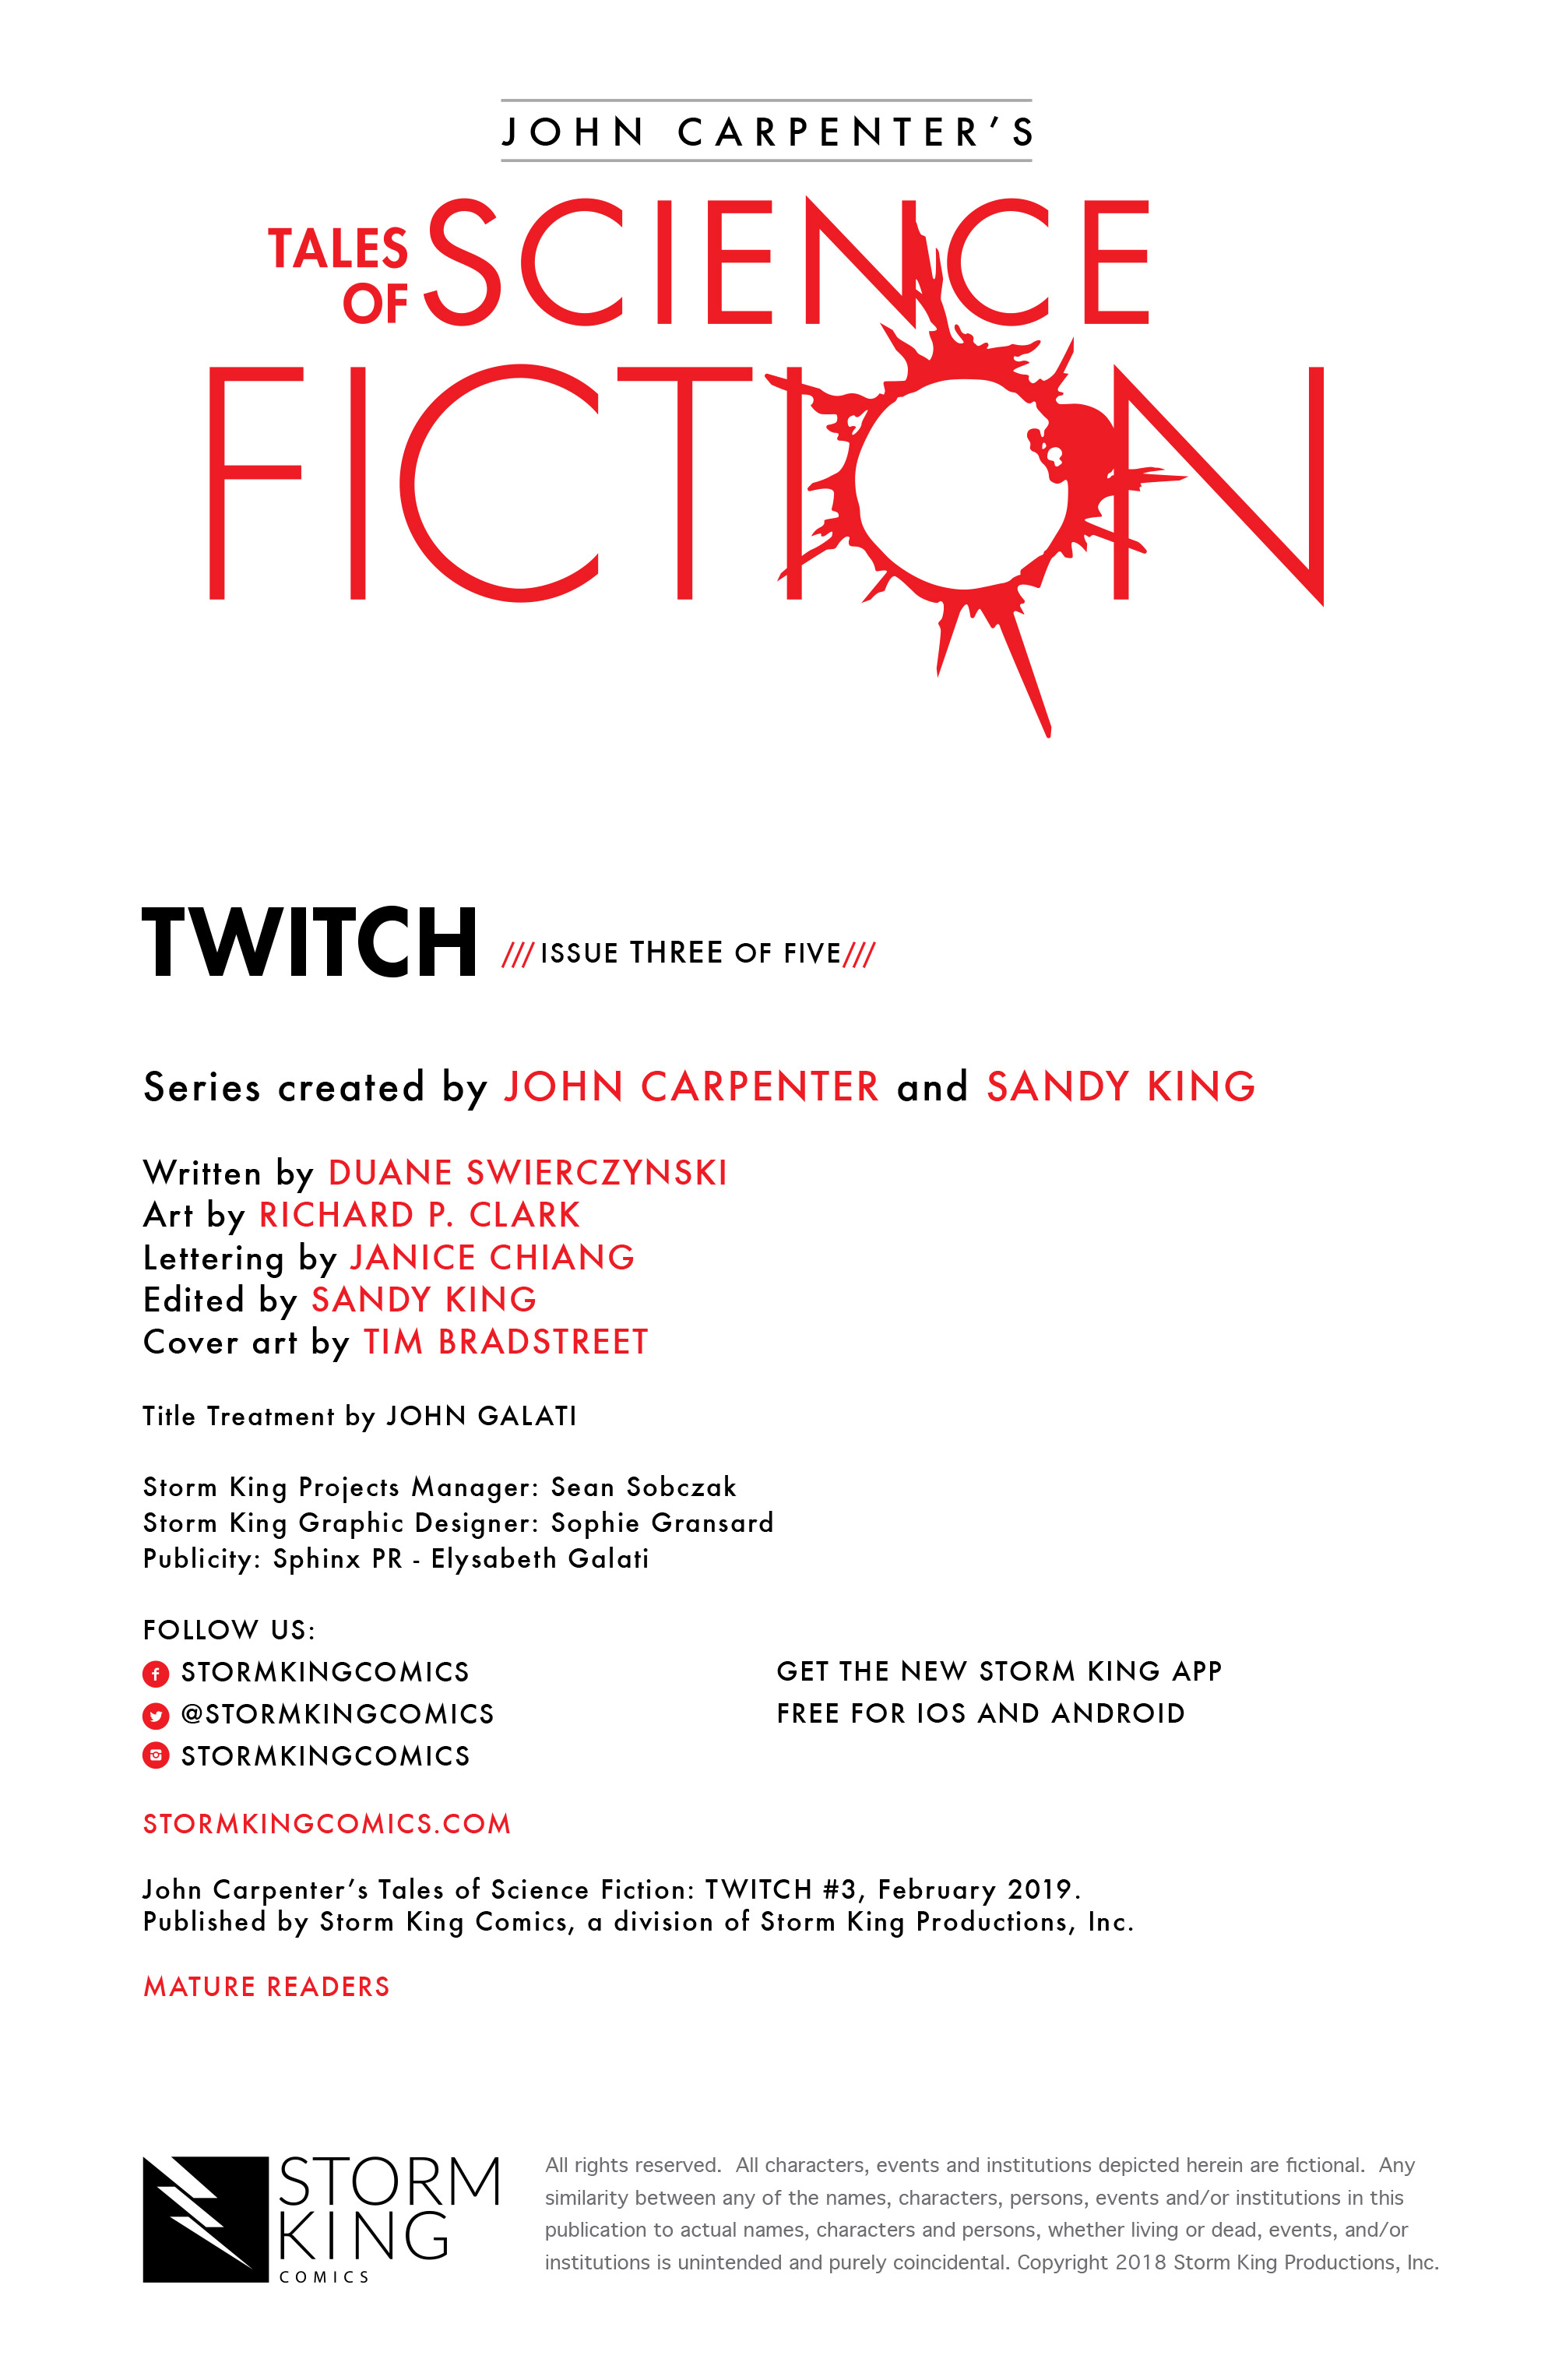 Read online John Carpenter's Tales of Science Fiction: Twitch comic -  Issue #3 - 2